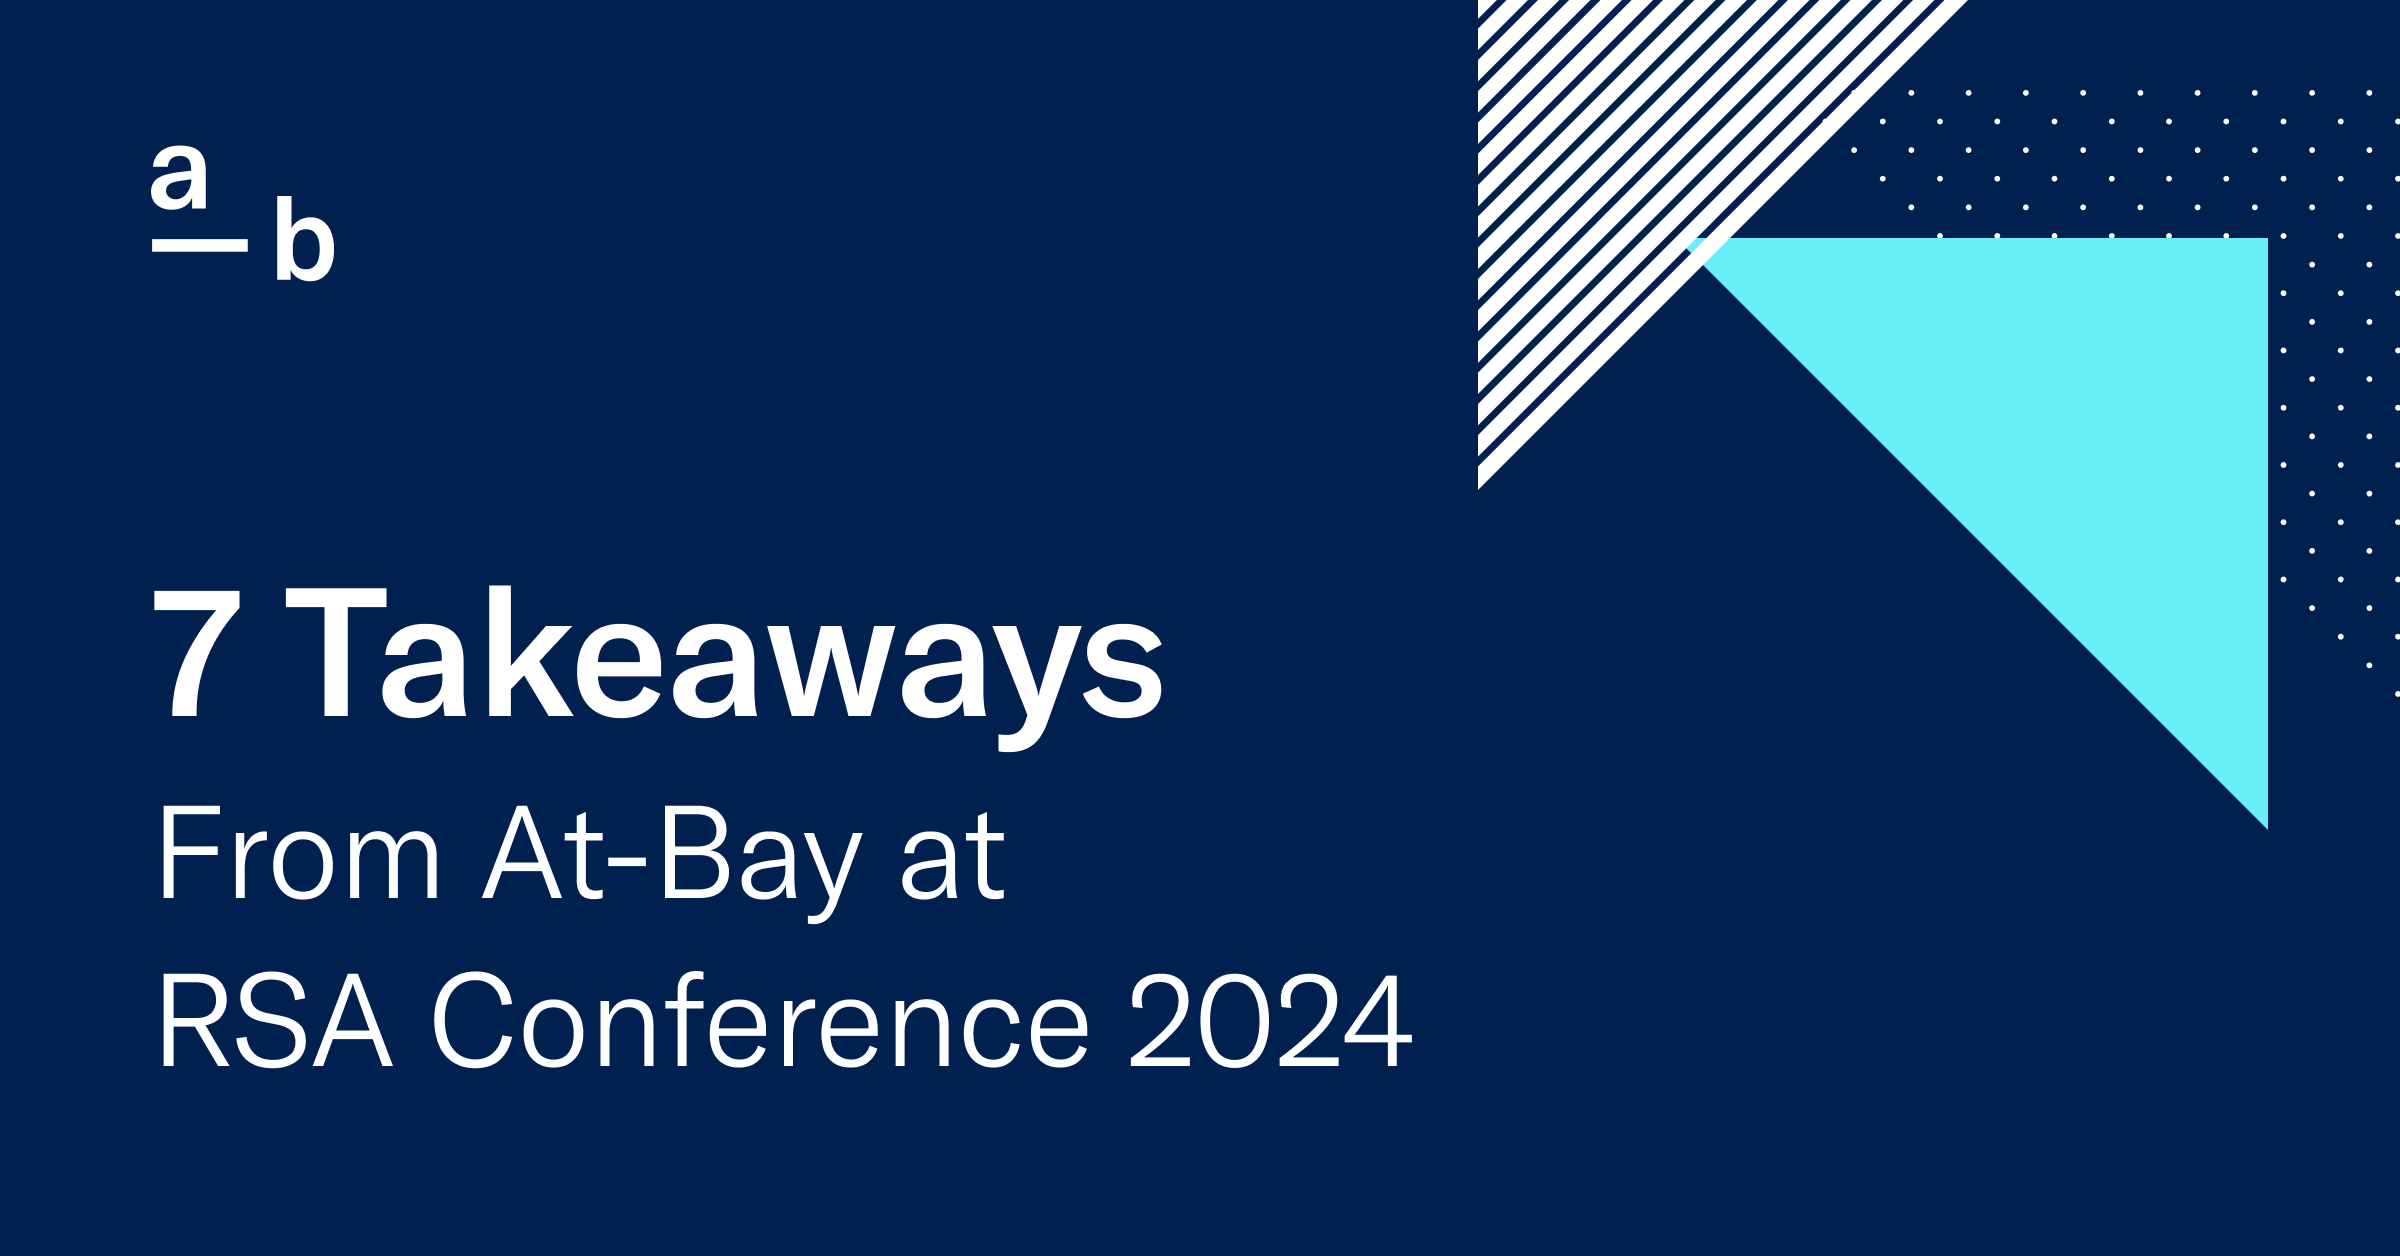 7 Takeaways From At-Bay at RSA Conference 2024